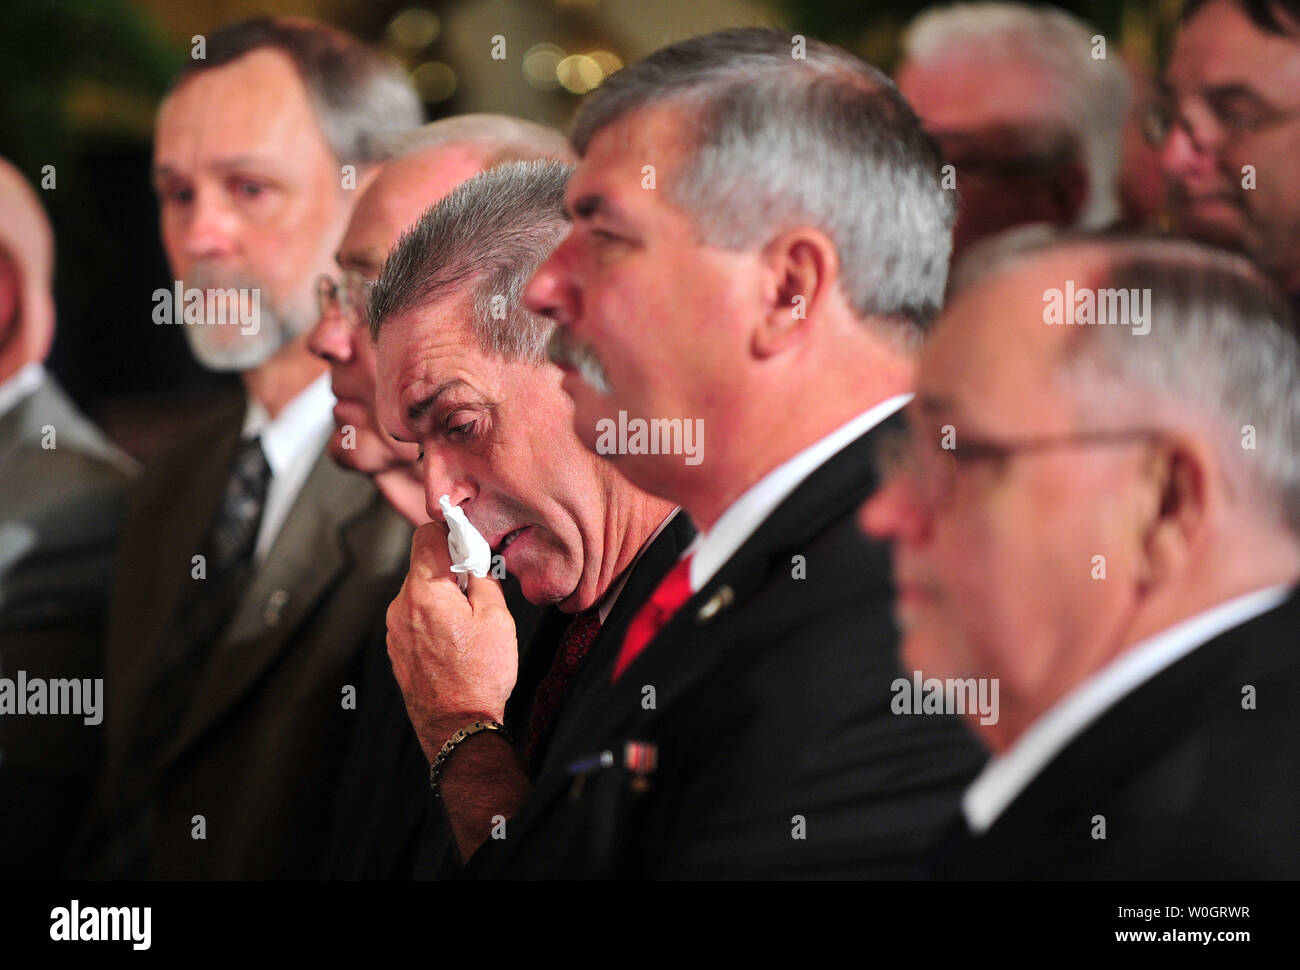 A member of Bravo company wipes tears from his face as U.S. President Barack Obama delivers remarks during the Medal of Honor ceremony for his former comrade U.S. Army Specialist Leslie H. Sabo, Jr., in the East Room of the White House in Washington, DC,on May 16, 2012. Sabo was awarded the metal for his extreme acts of bravery while fighting in Cambodia as part of the Vietnam War. Sabo picked up a live enemy grenade and threw it back while shielding a wounded comrade with his own body. He then charged an enemy position, throwing another grenade into an enemy bunker killing himself in the blas Stock Photo